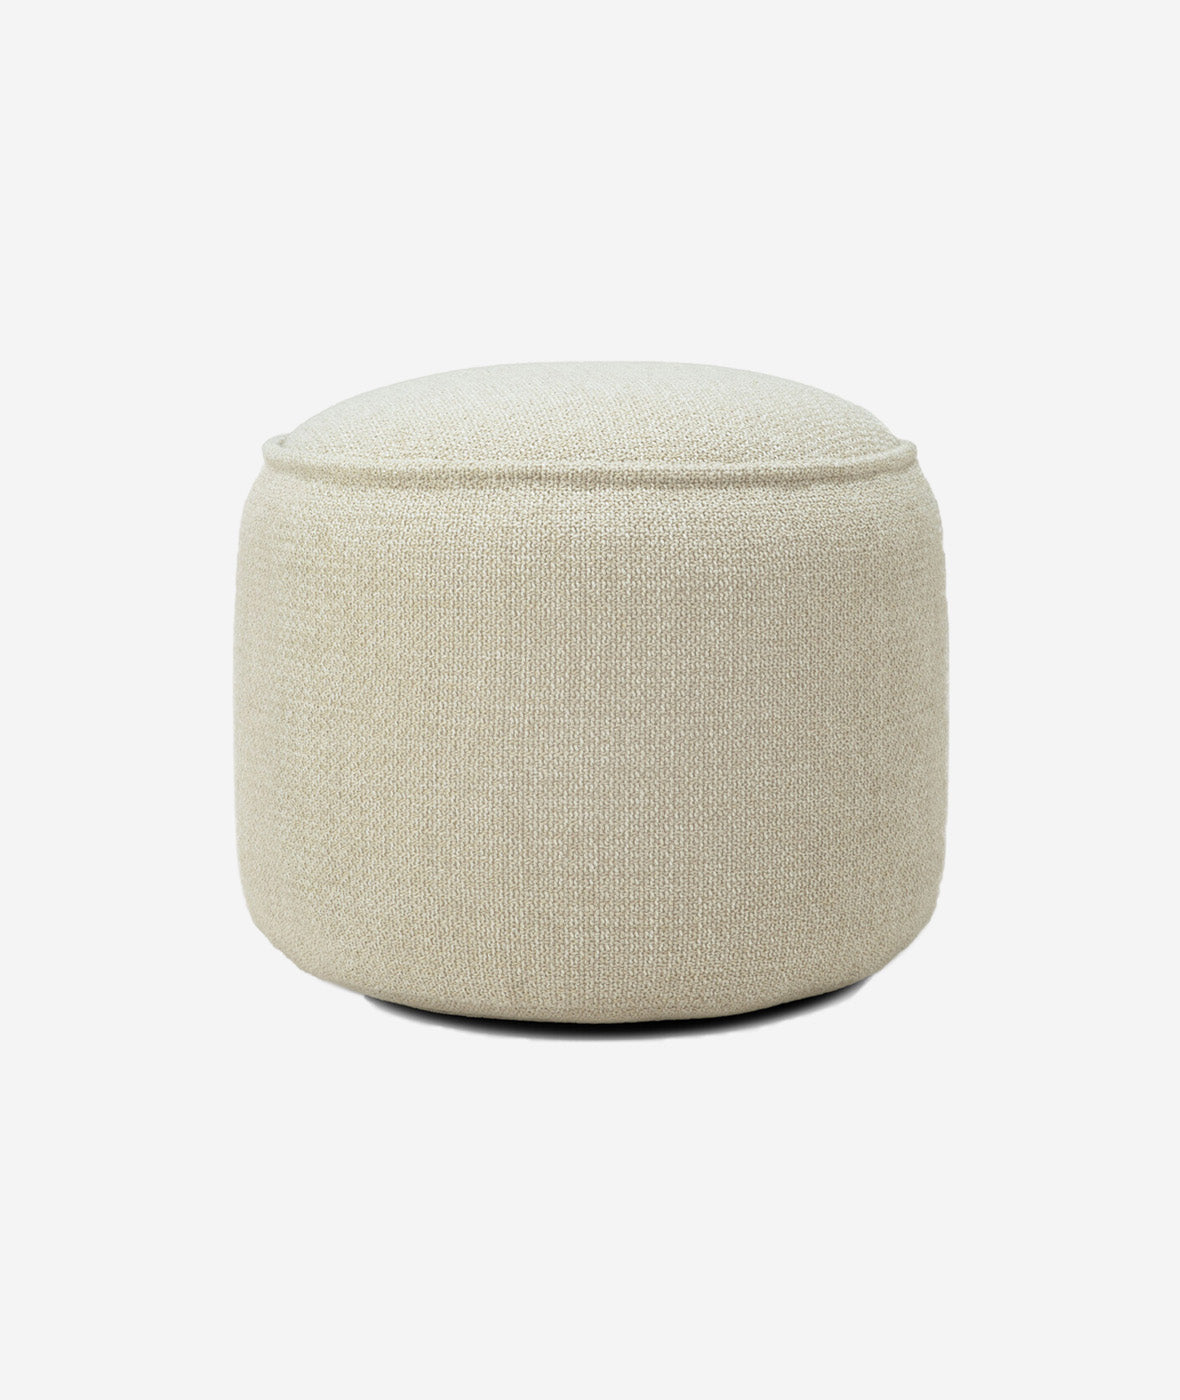 Donut Outdoor Pouf - More Options